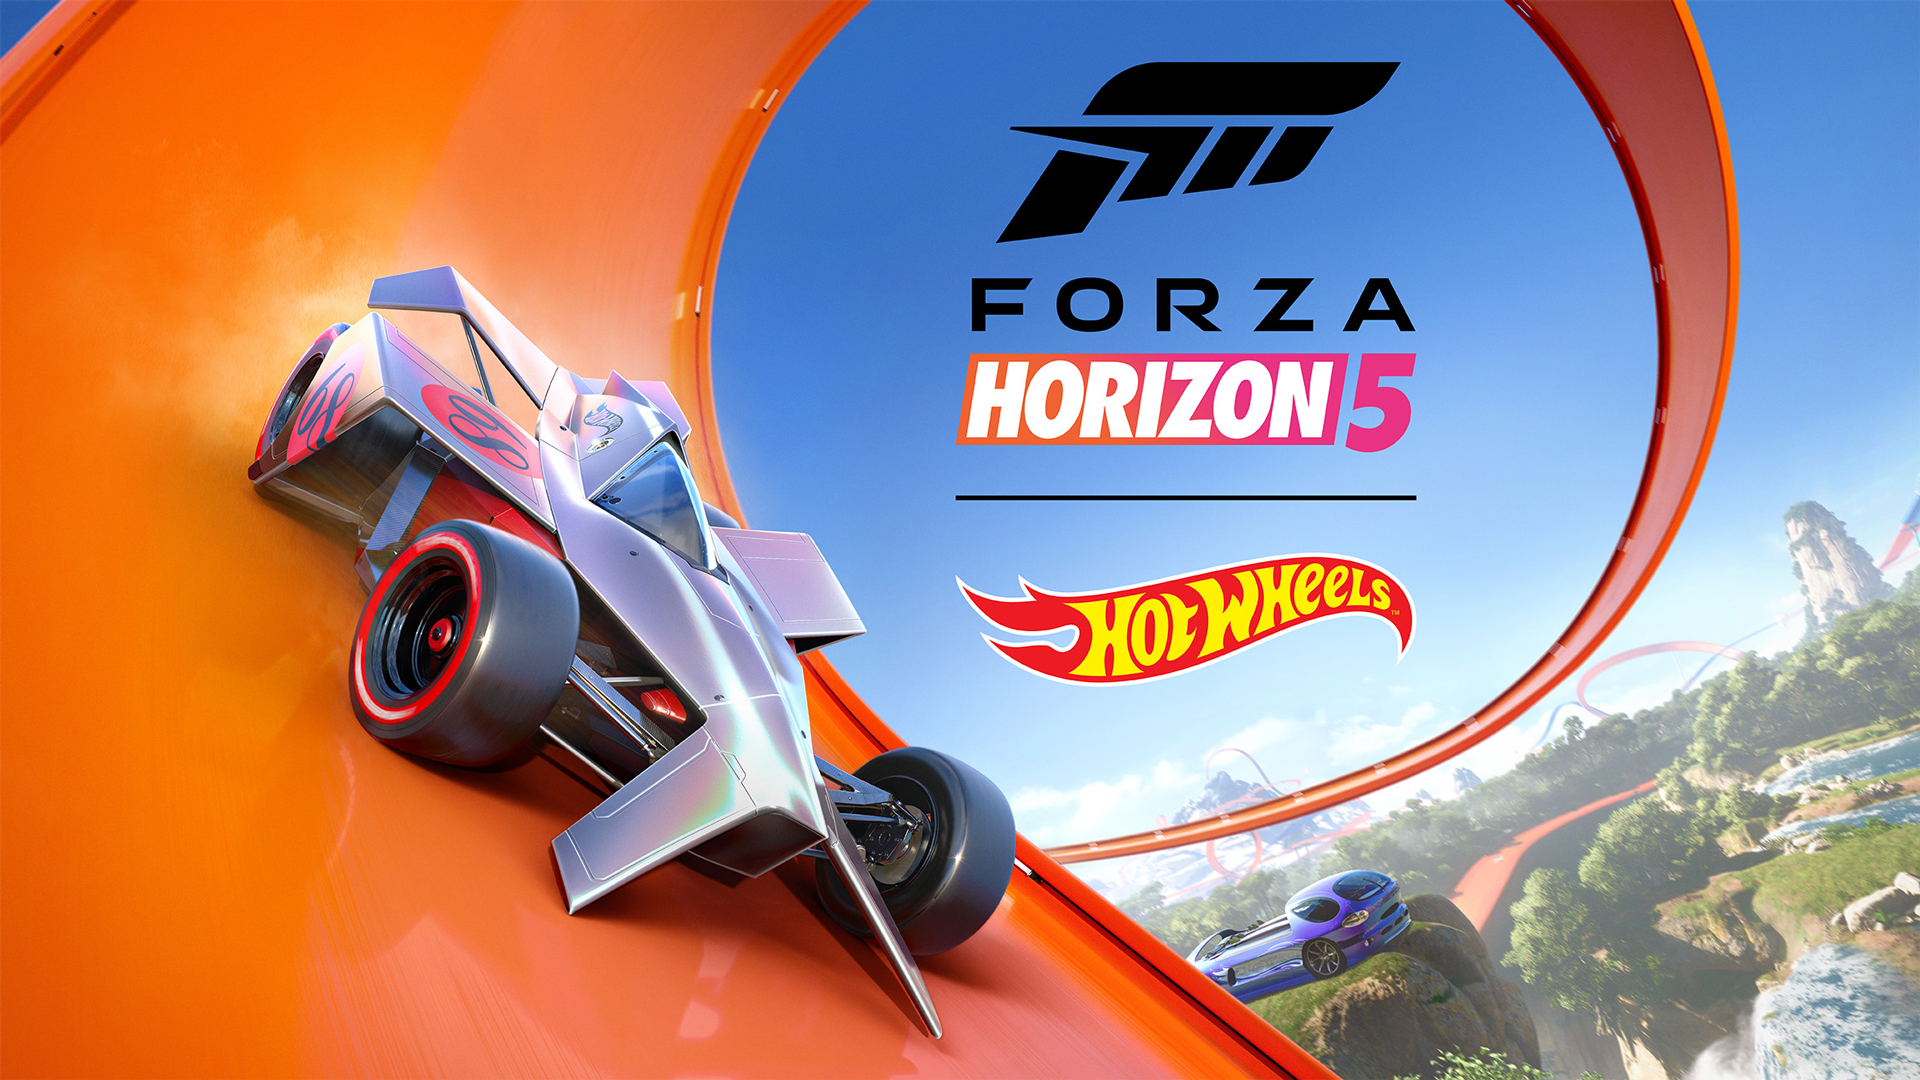 Is+the+Forza+Horizon+5%3A+Hot+Wheels+DLC+expansion+worth+it%3F+%7C+Windows+Central